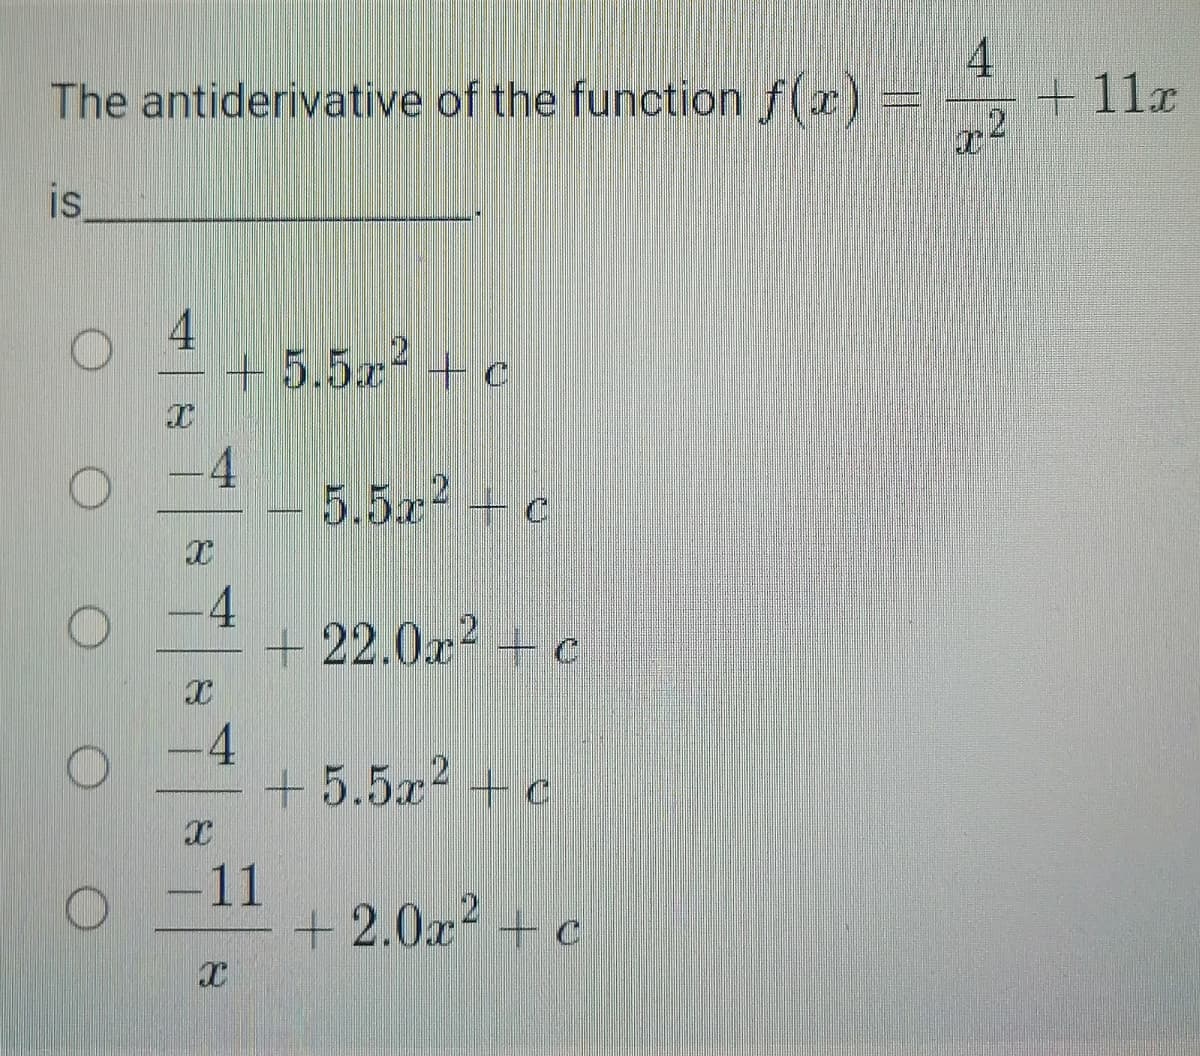 The antiderivative of the function f(x)
+ 11x
21
is,
+ 5.5x + c
4
5.5x +c
-4
+ 22.0x + c
-4
+5.5x² +c
-11
+2.0x + c
